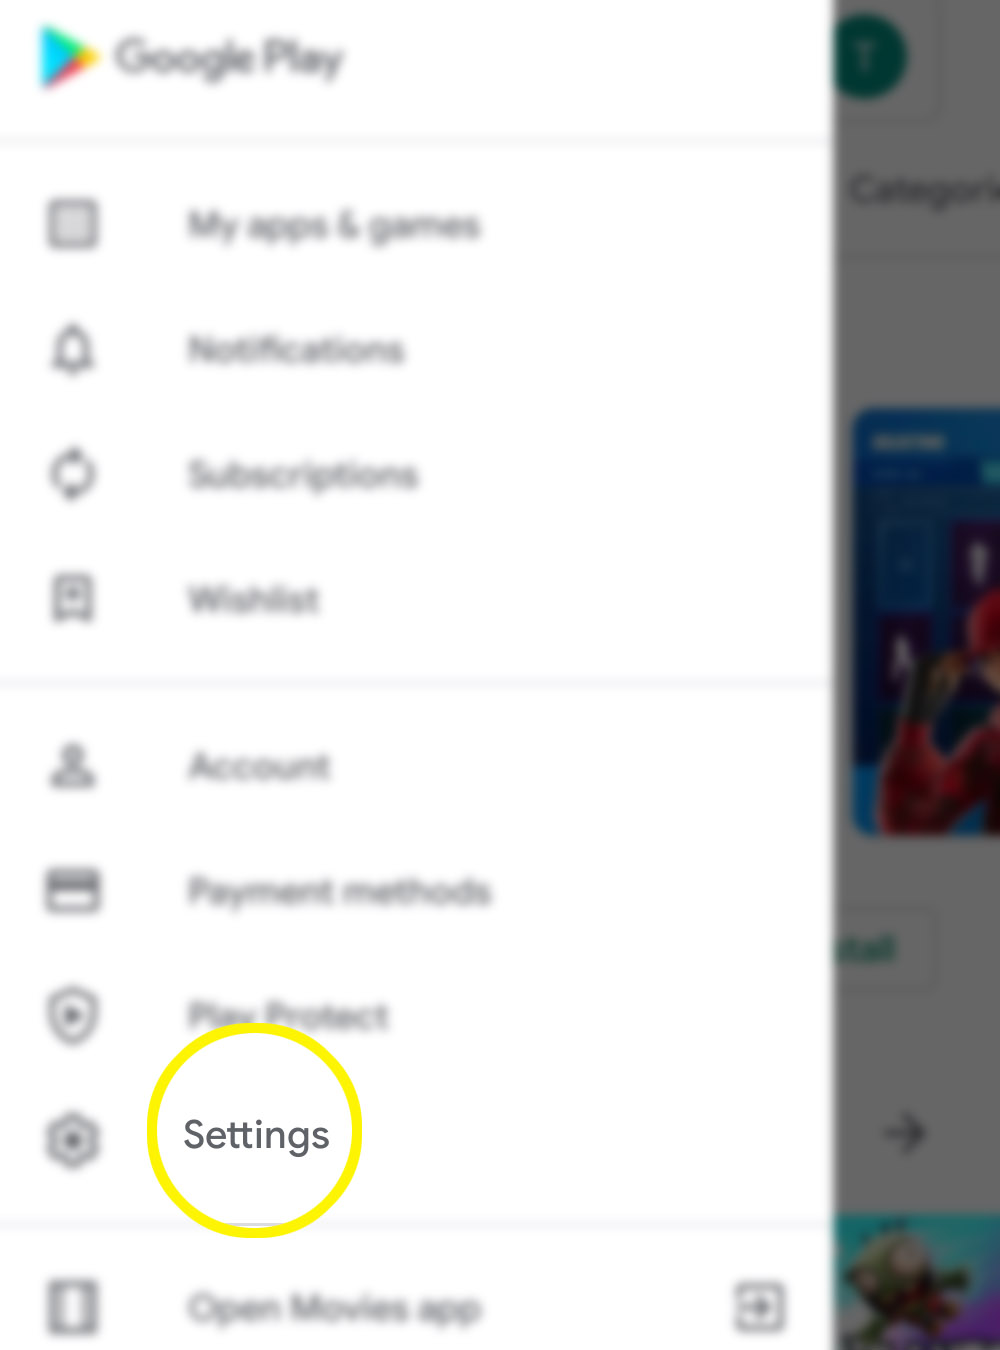 enable disable automatic app updates s20 play store - settings